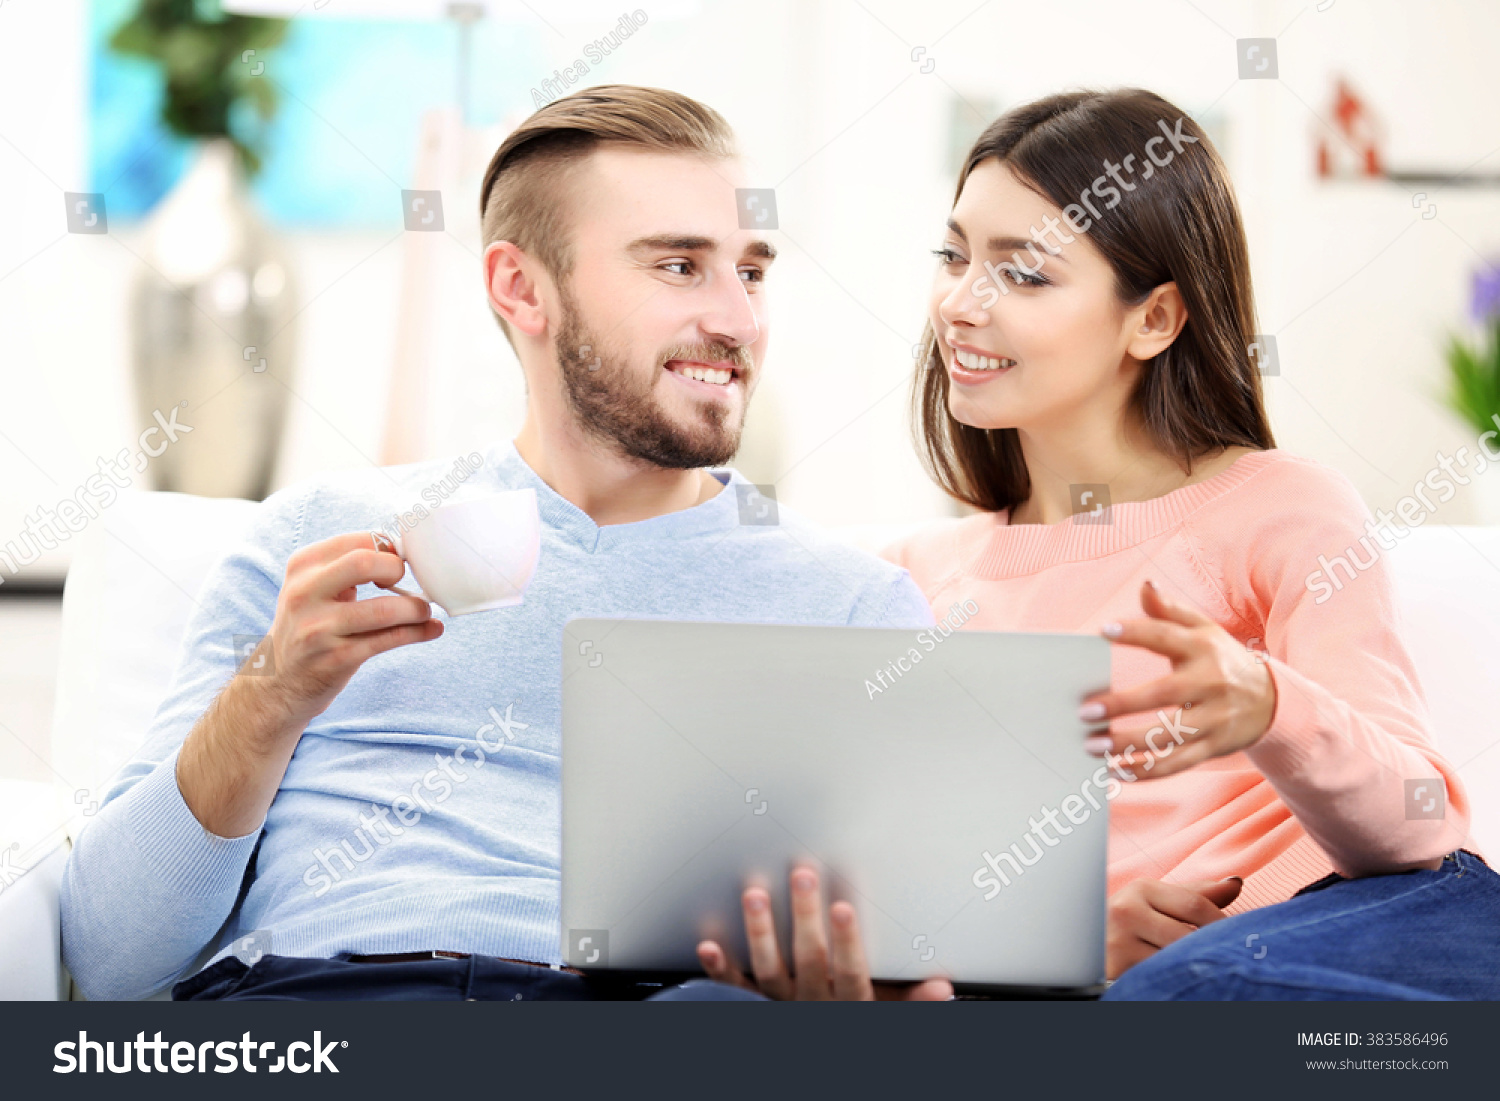 Happy couple working on laptop in a room #383586496